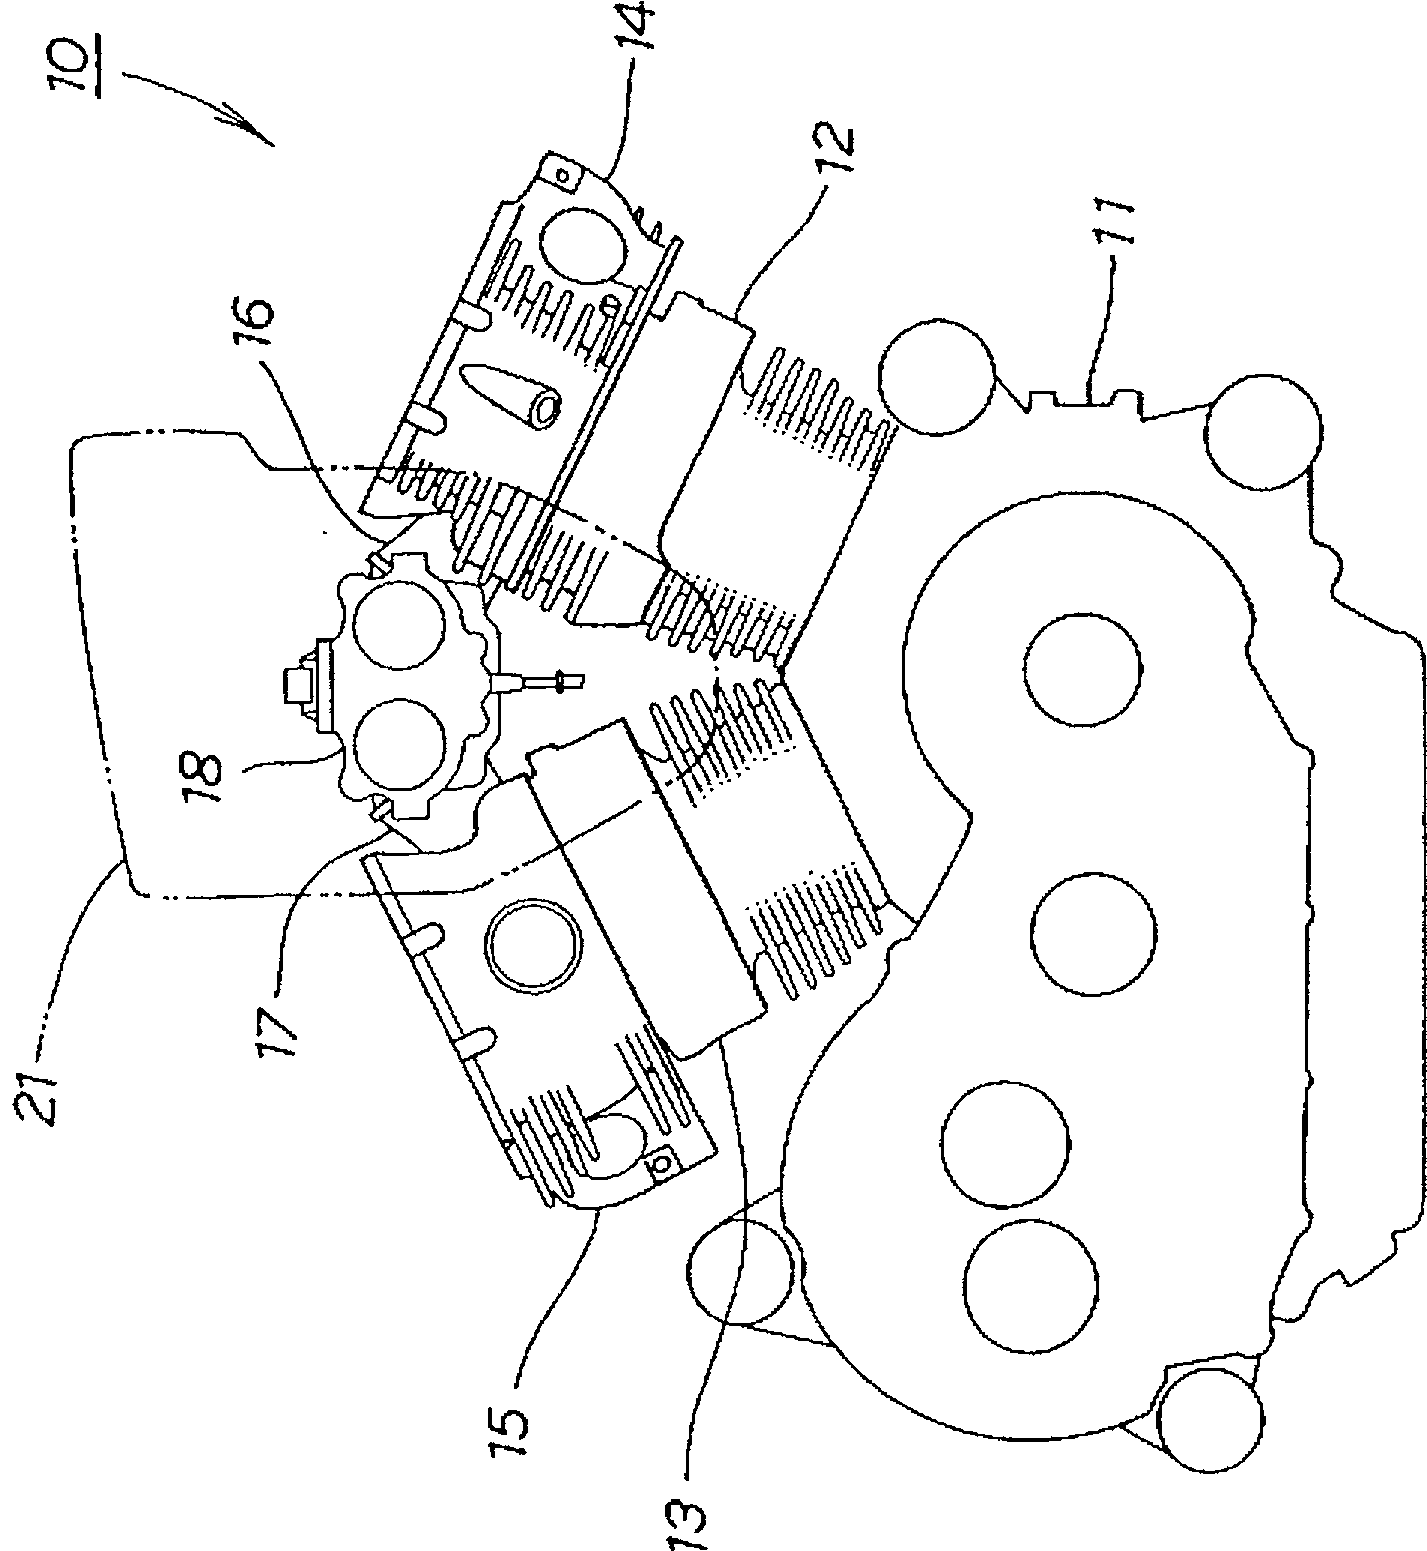 Fuel jetting valve dispatching structure of V-type two-cylinder engine